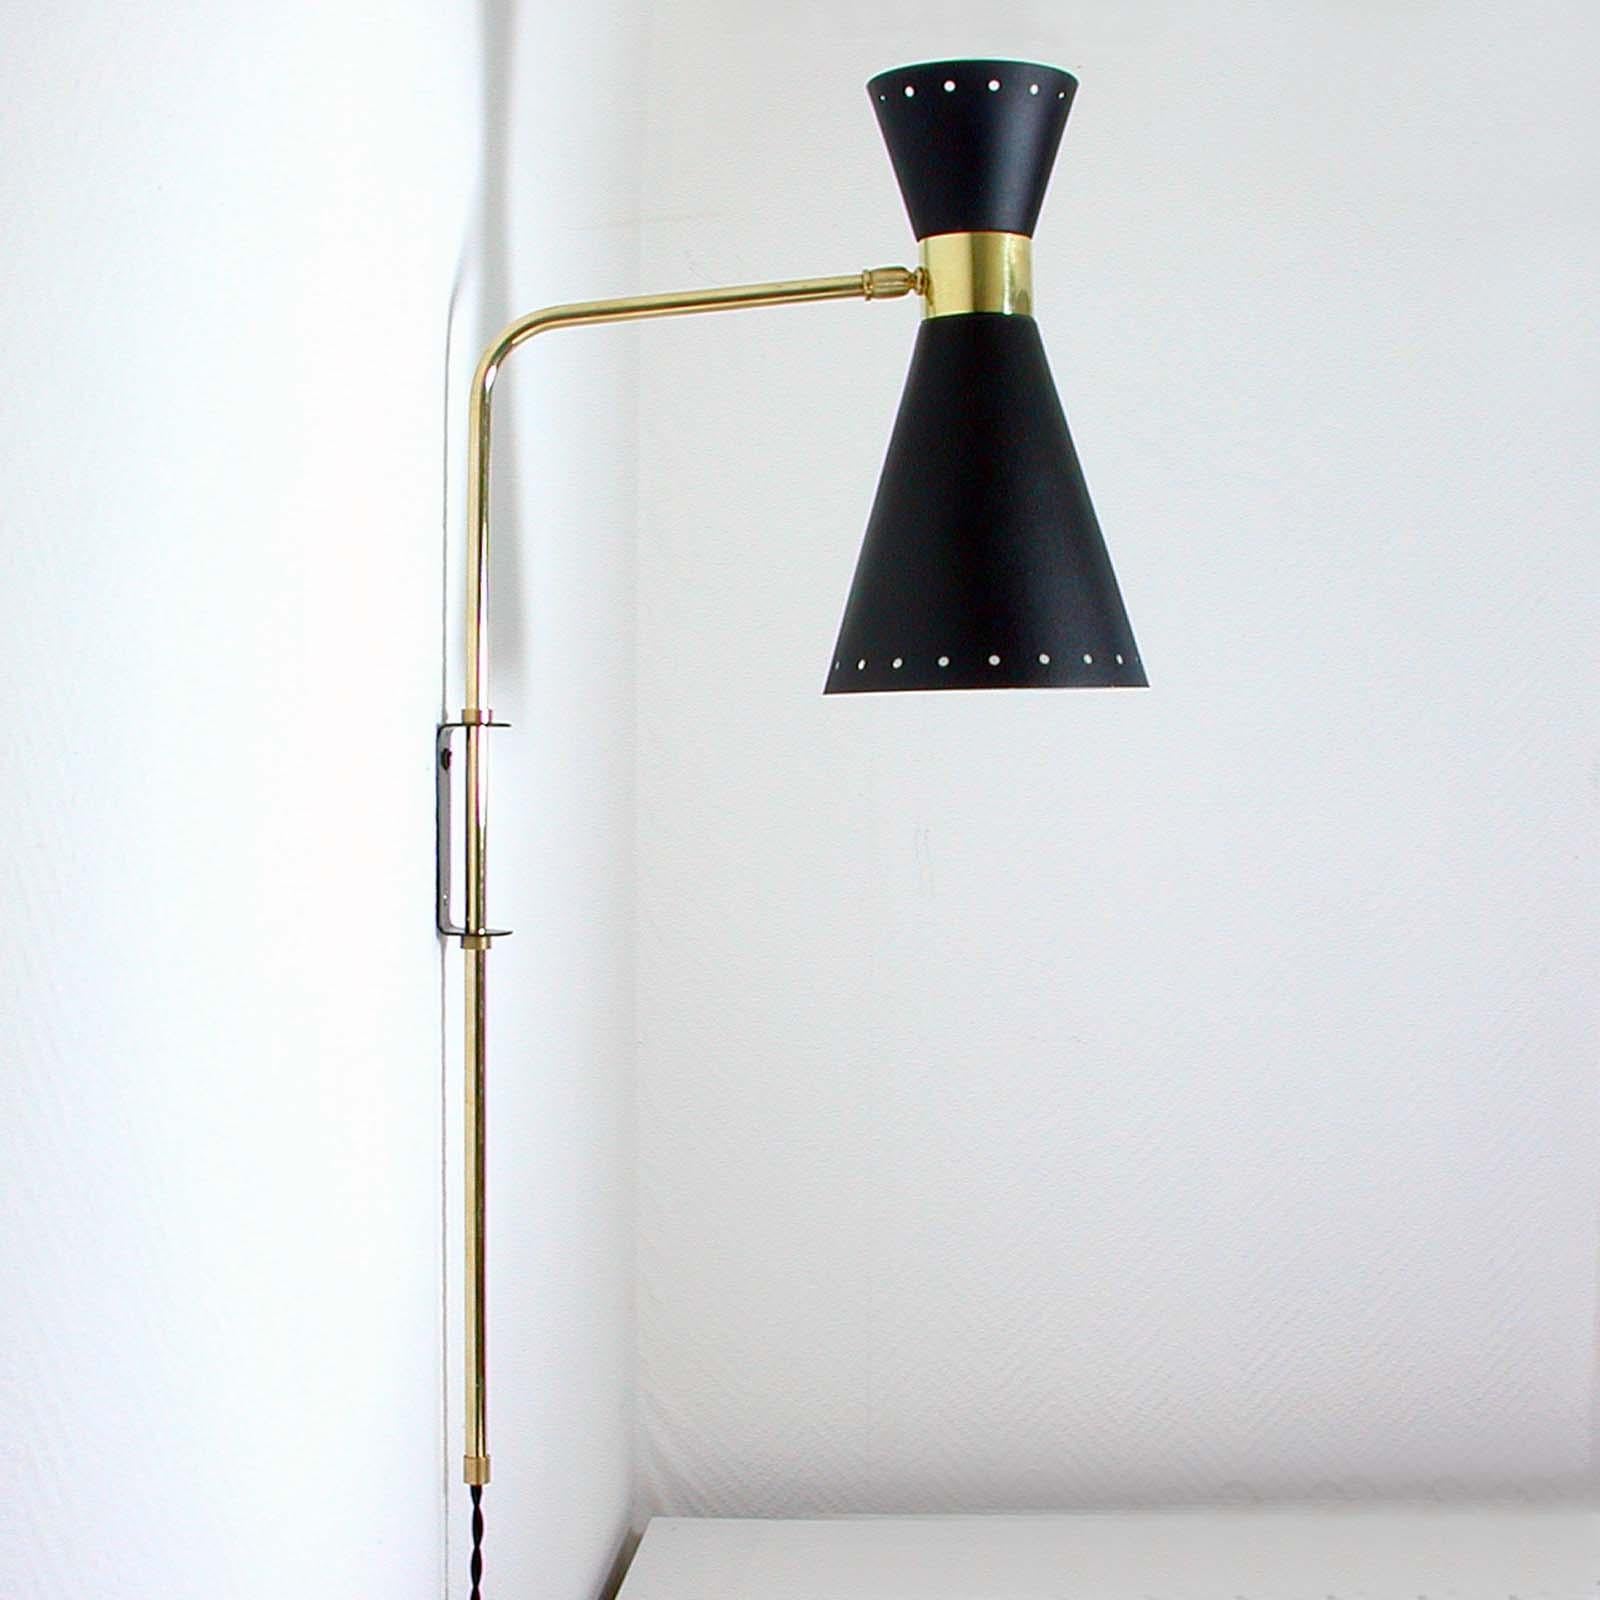 Brass Midcentury French Diabolo Articulating Wall Lamp Sconce, 1950s For Sale